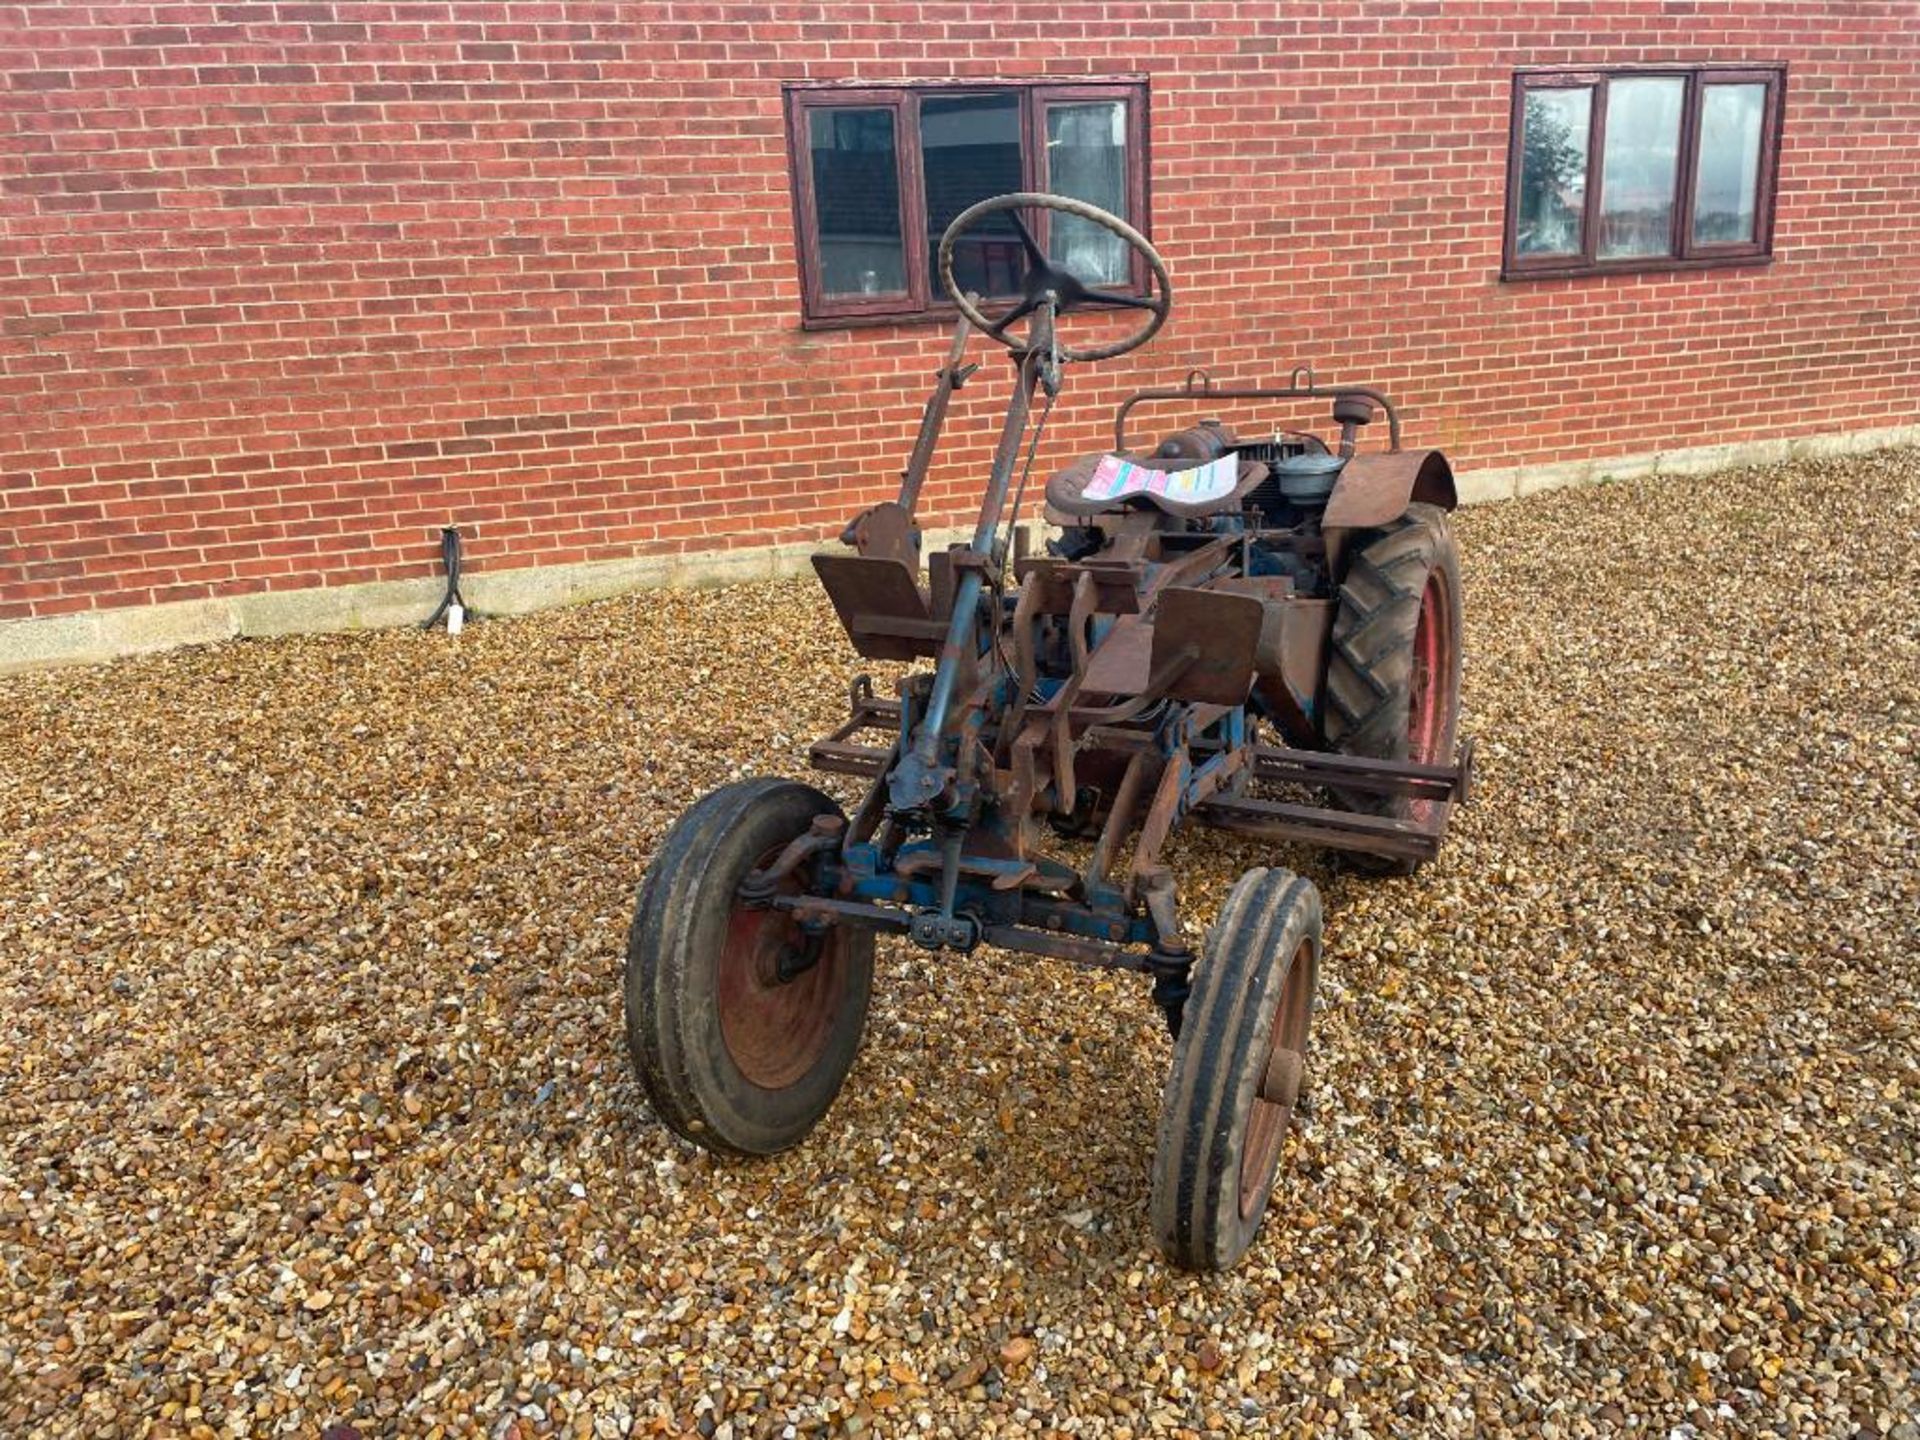 1949 Garner Light Tractor 2wd petrol tractor with JAP Model S air cooled engine on 7.50-16 front and - Image 3 of 19